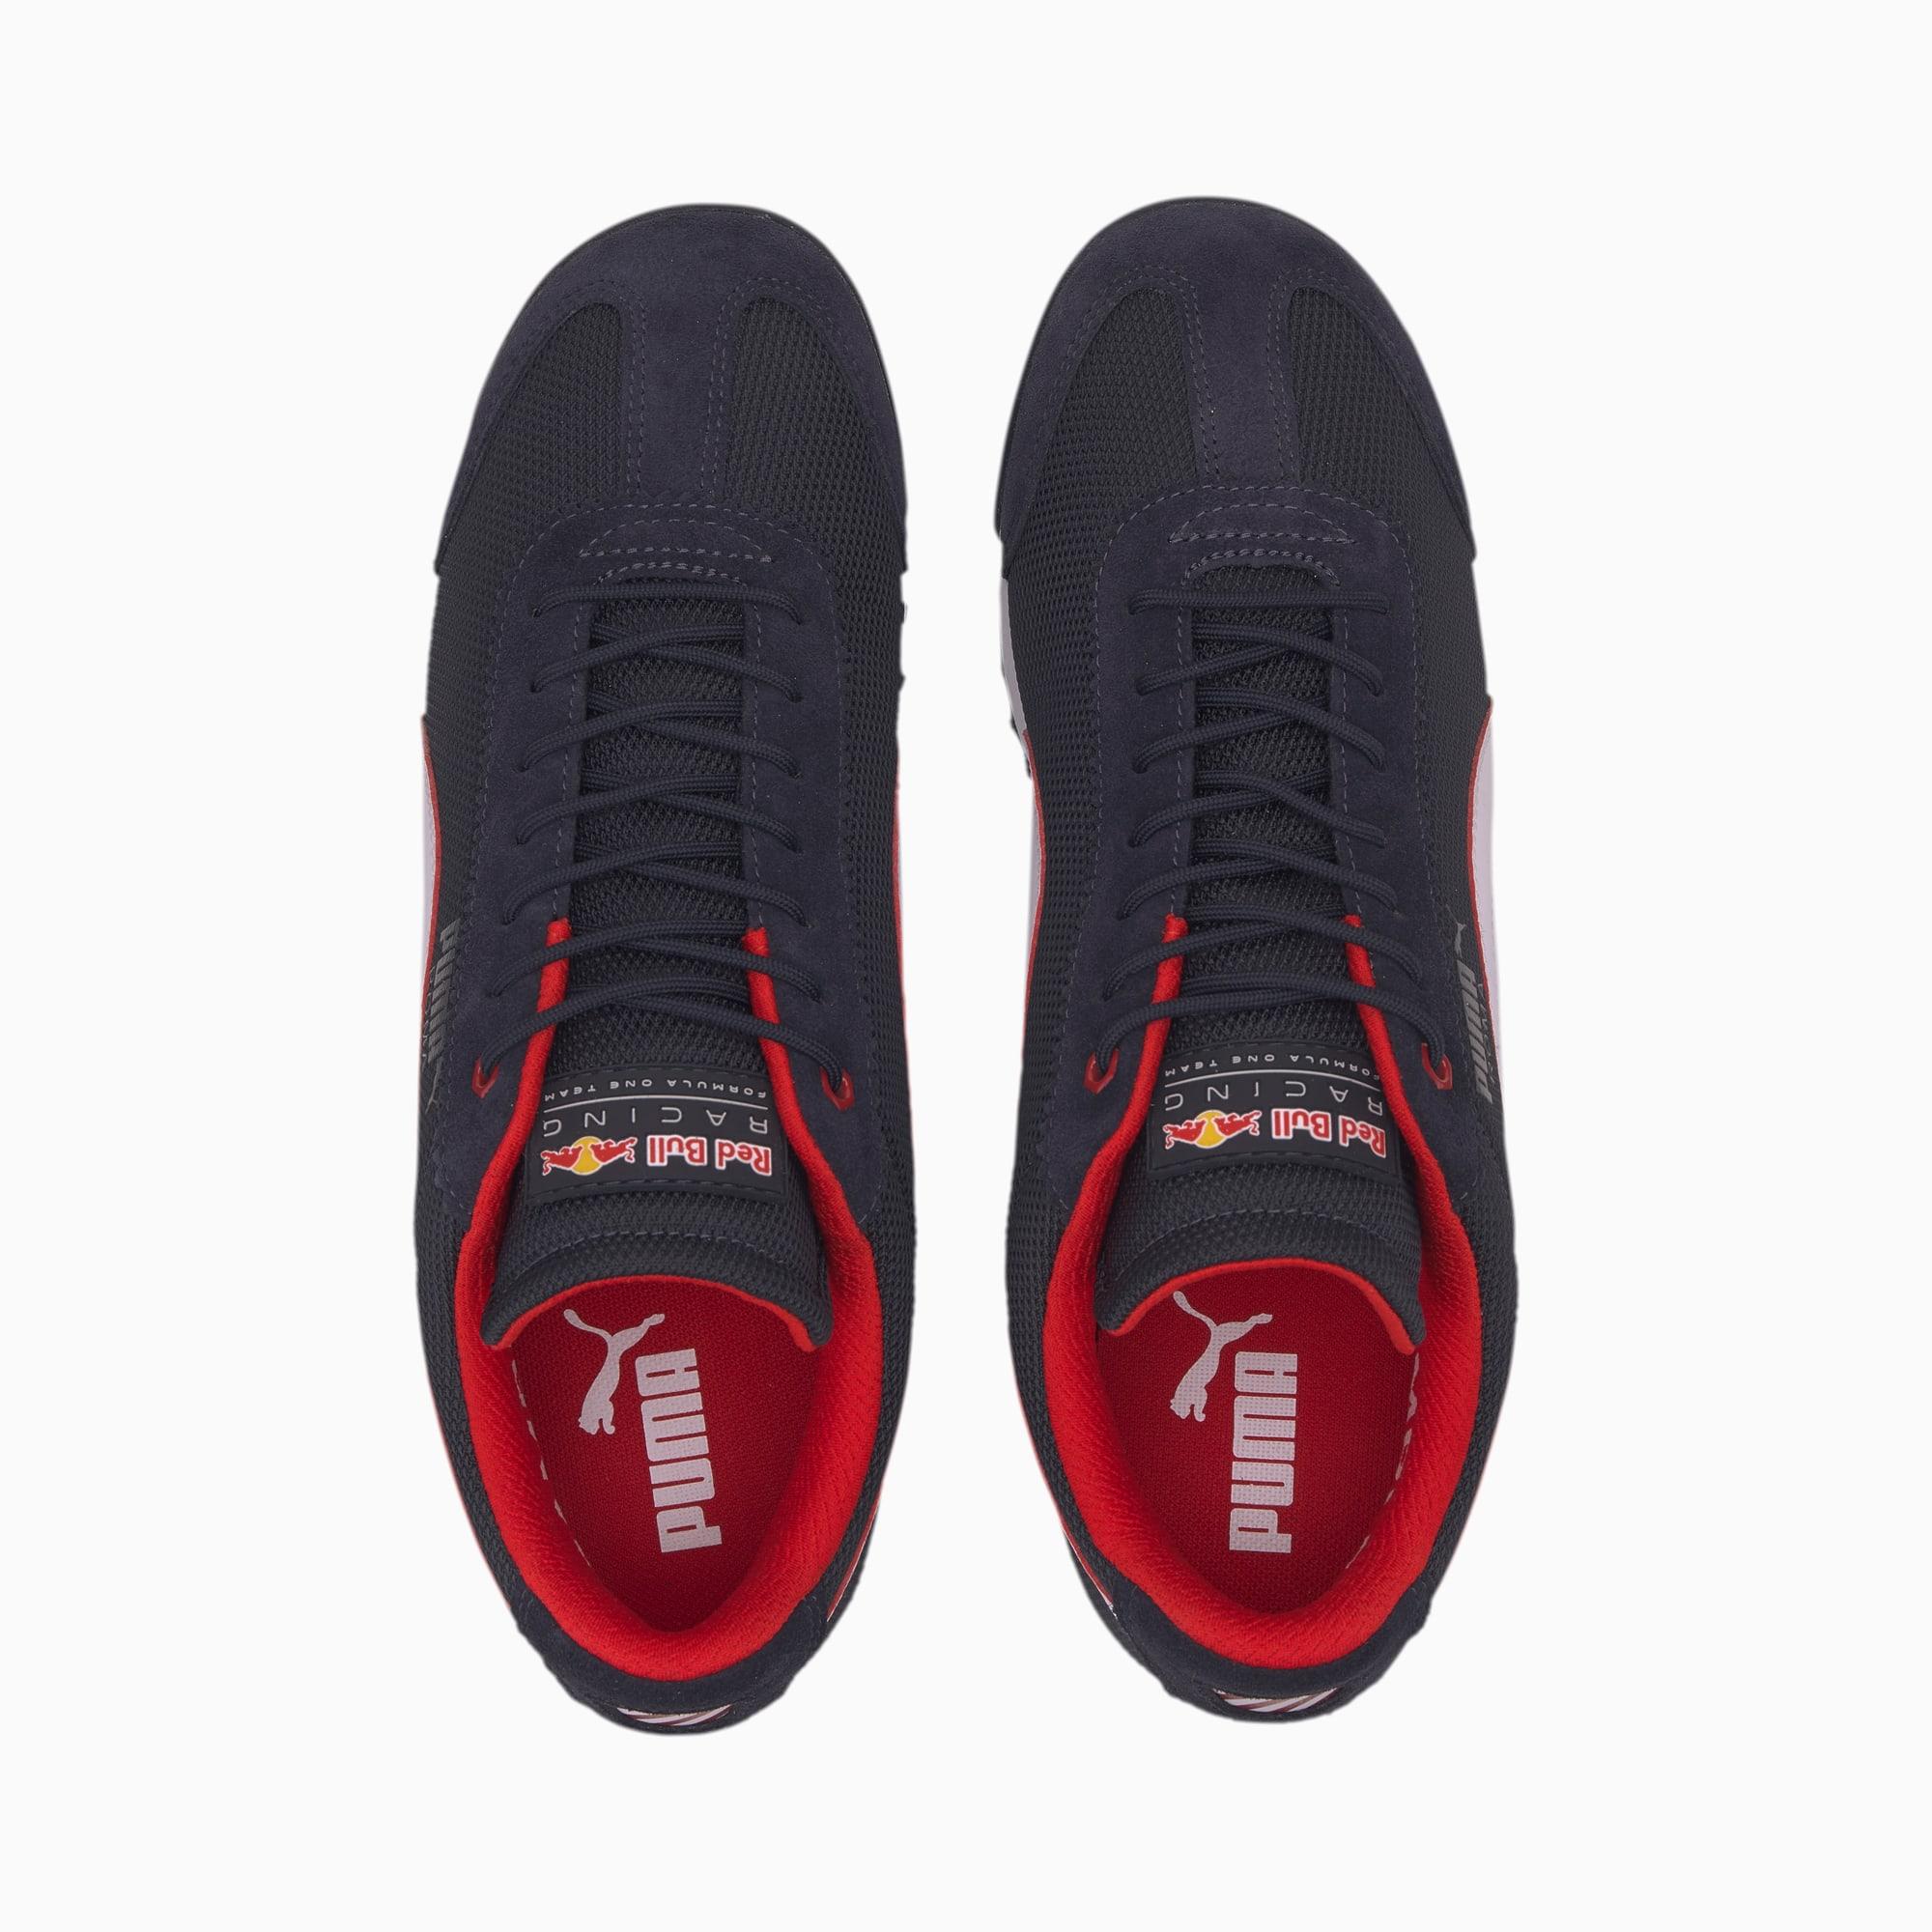 PUMA Suede Red Bull Racing Roma Sneakers in Blue for Men - Lyst